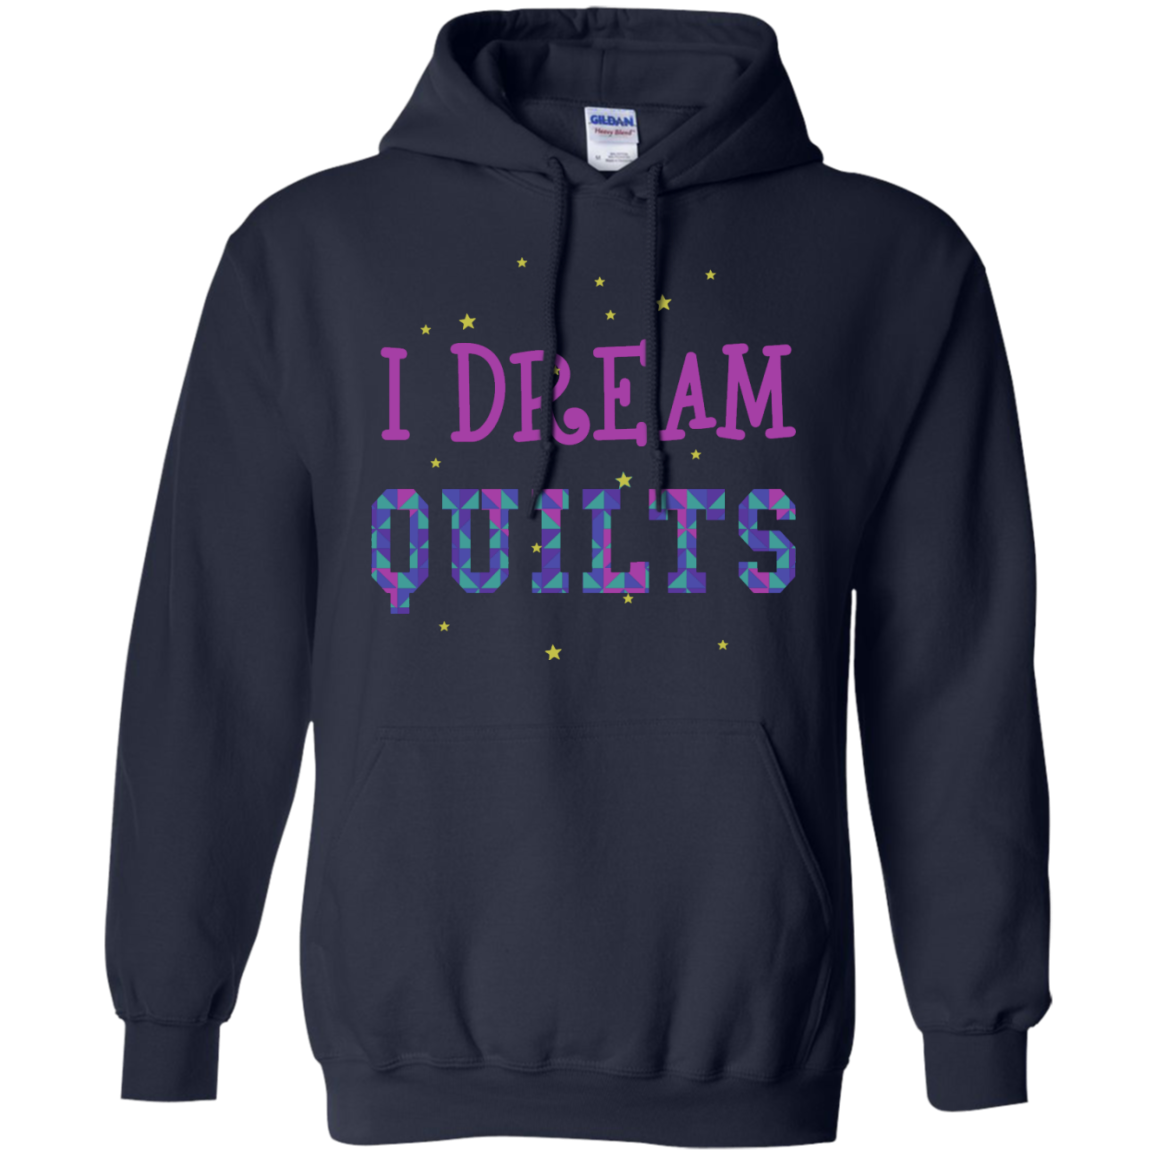 I Dream Quilts Pullover Hoodie - Crafter4Life - 5